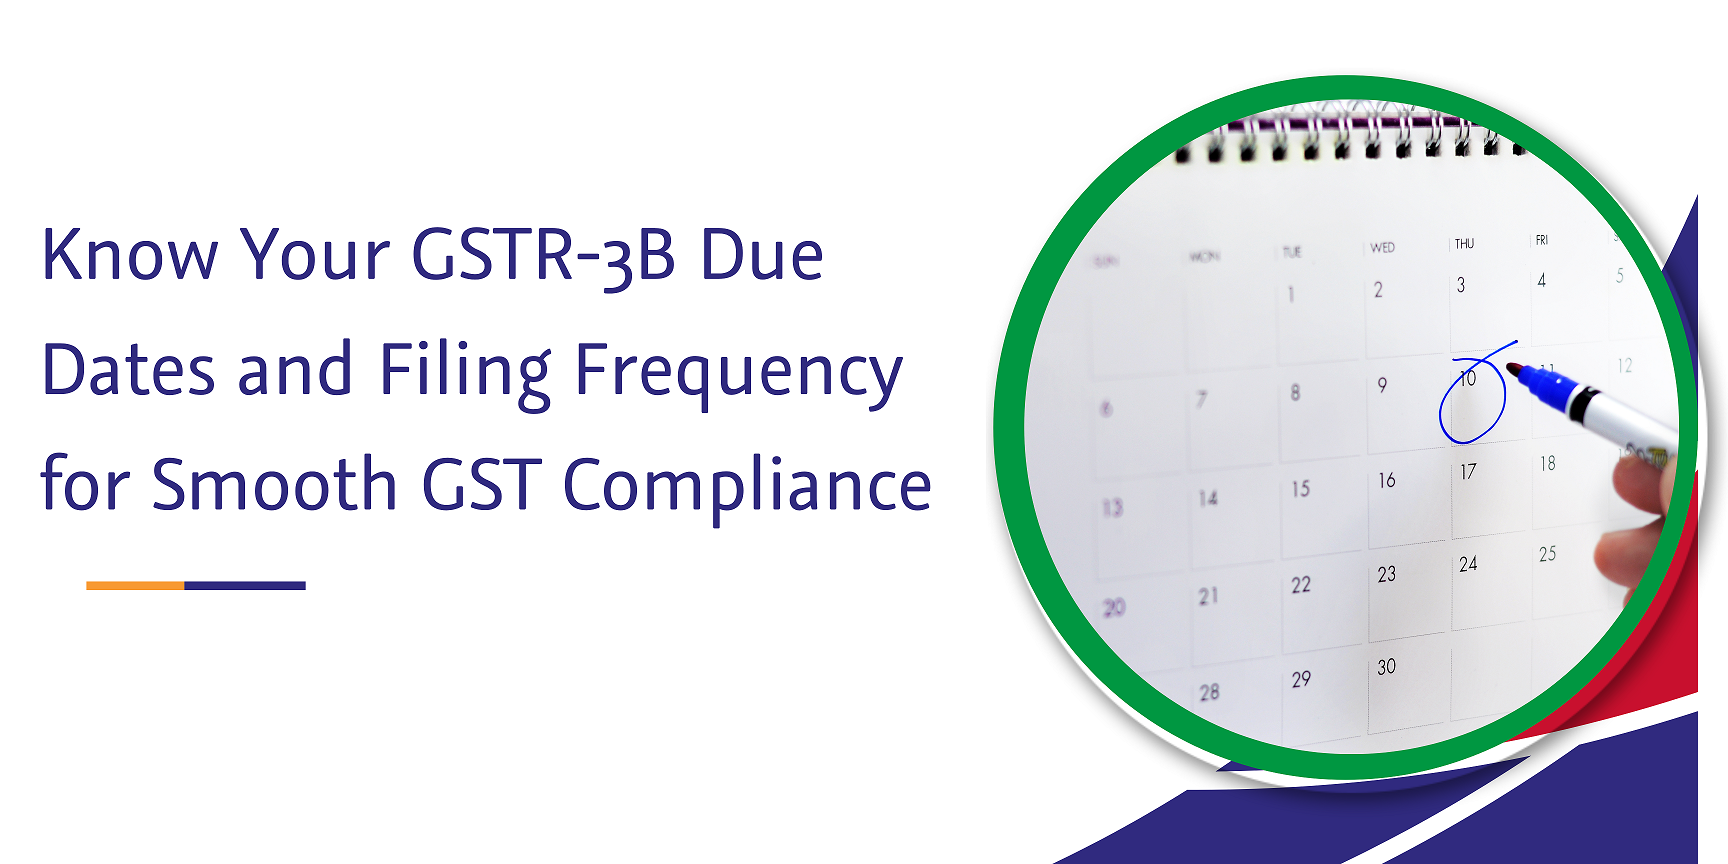 know your gstr-3b due dates and filing frequency for smooth gst compliance